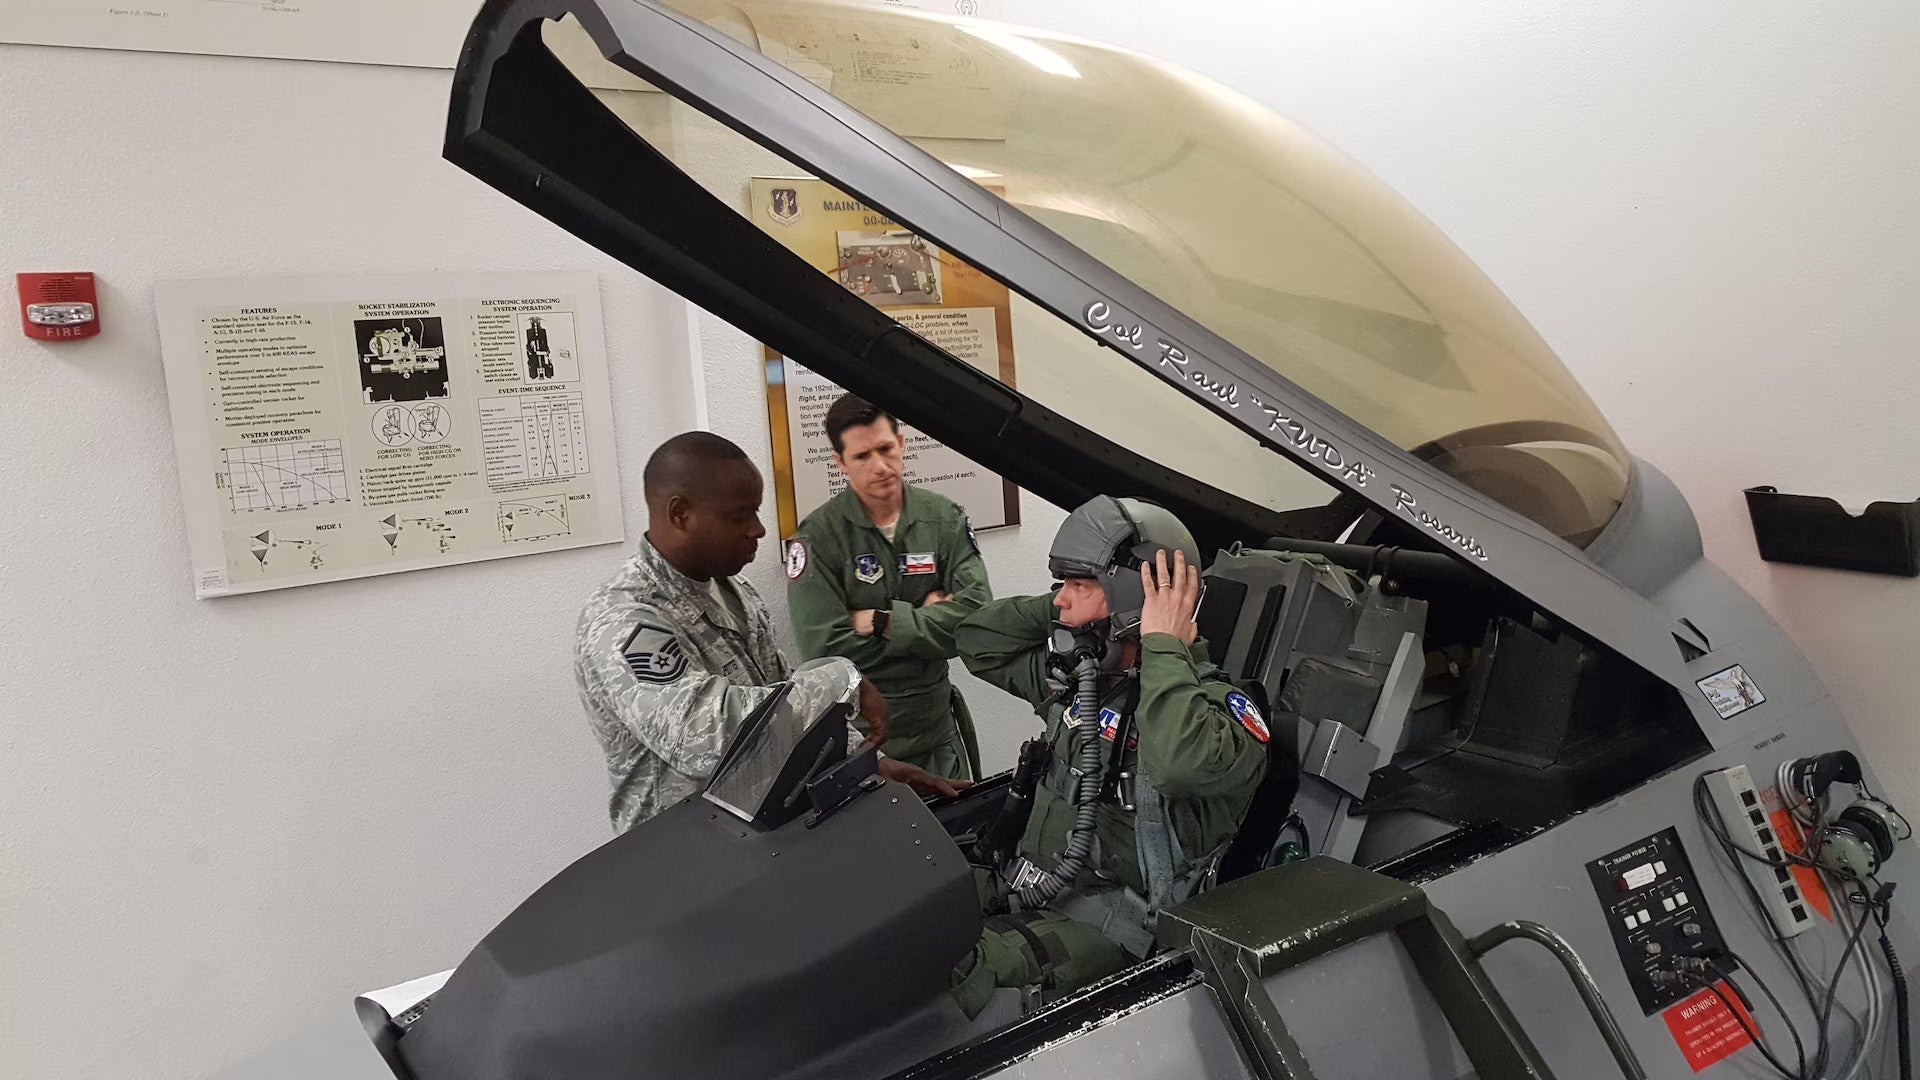 An F-16 pilot sits in a cockpit mockup during egress training on the ground. This training teaches pilots to get in and out of the cockpit safely in various situations, including if they need to eject in an emergency. USAF U.S. Air Force